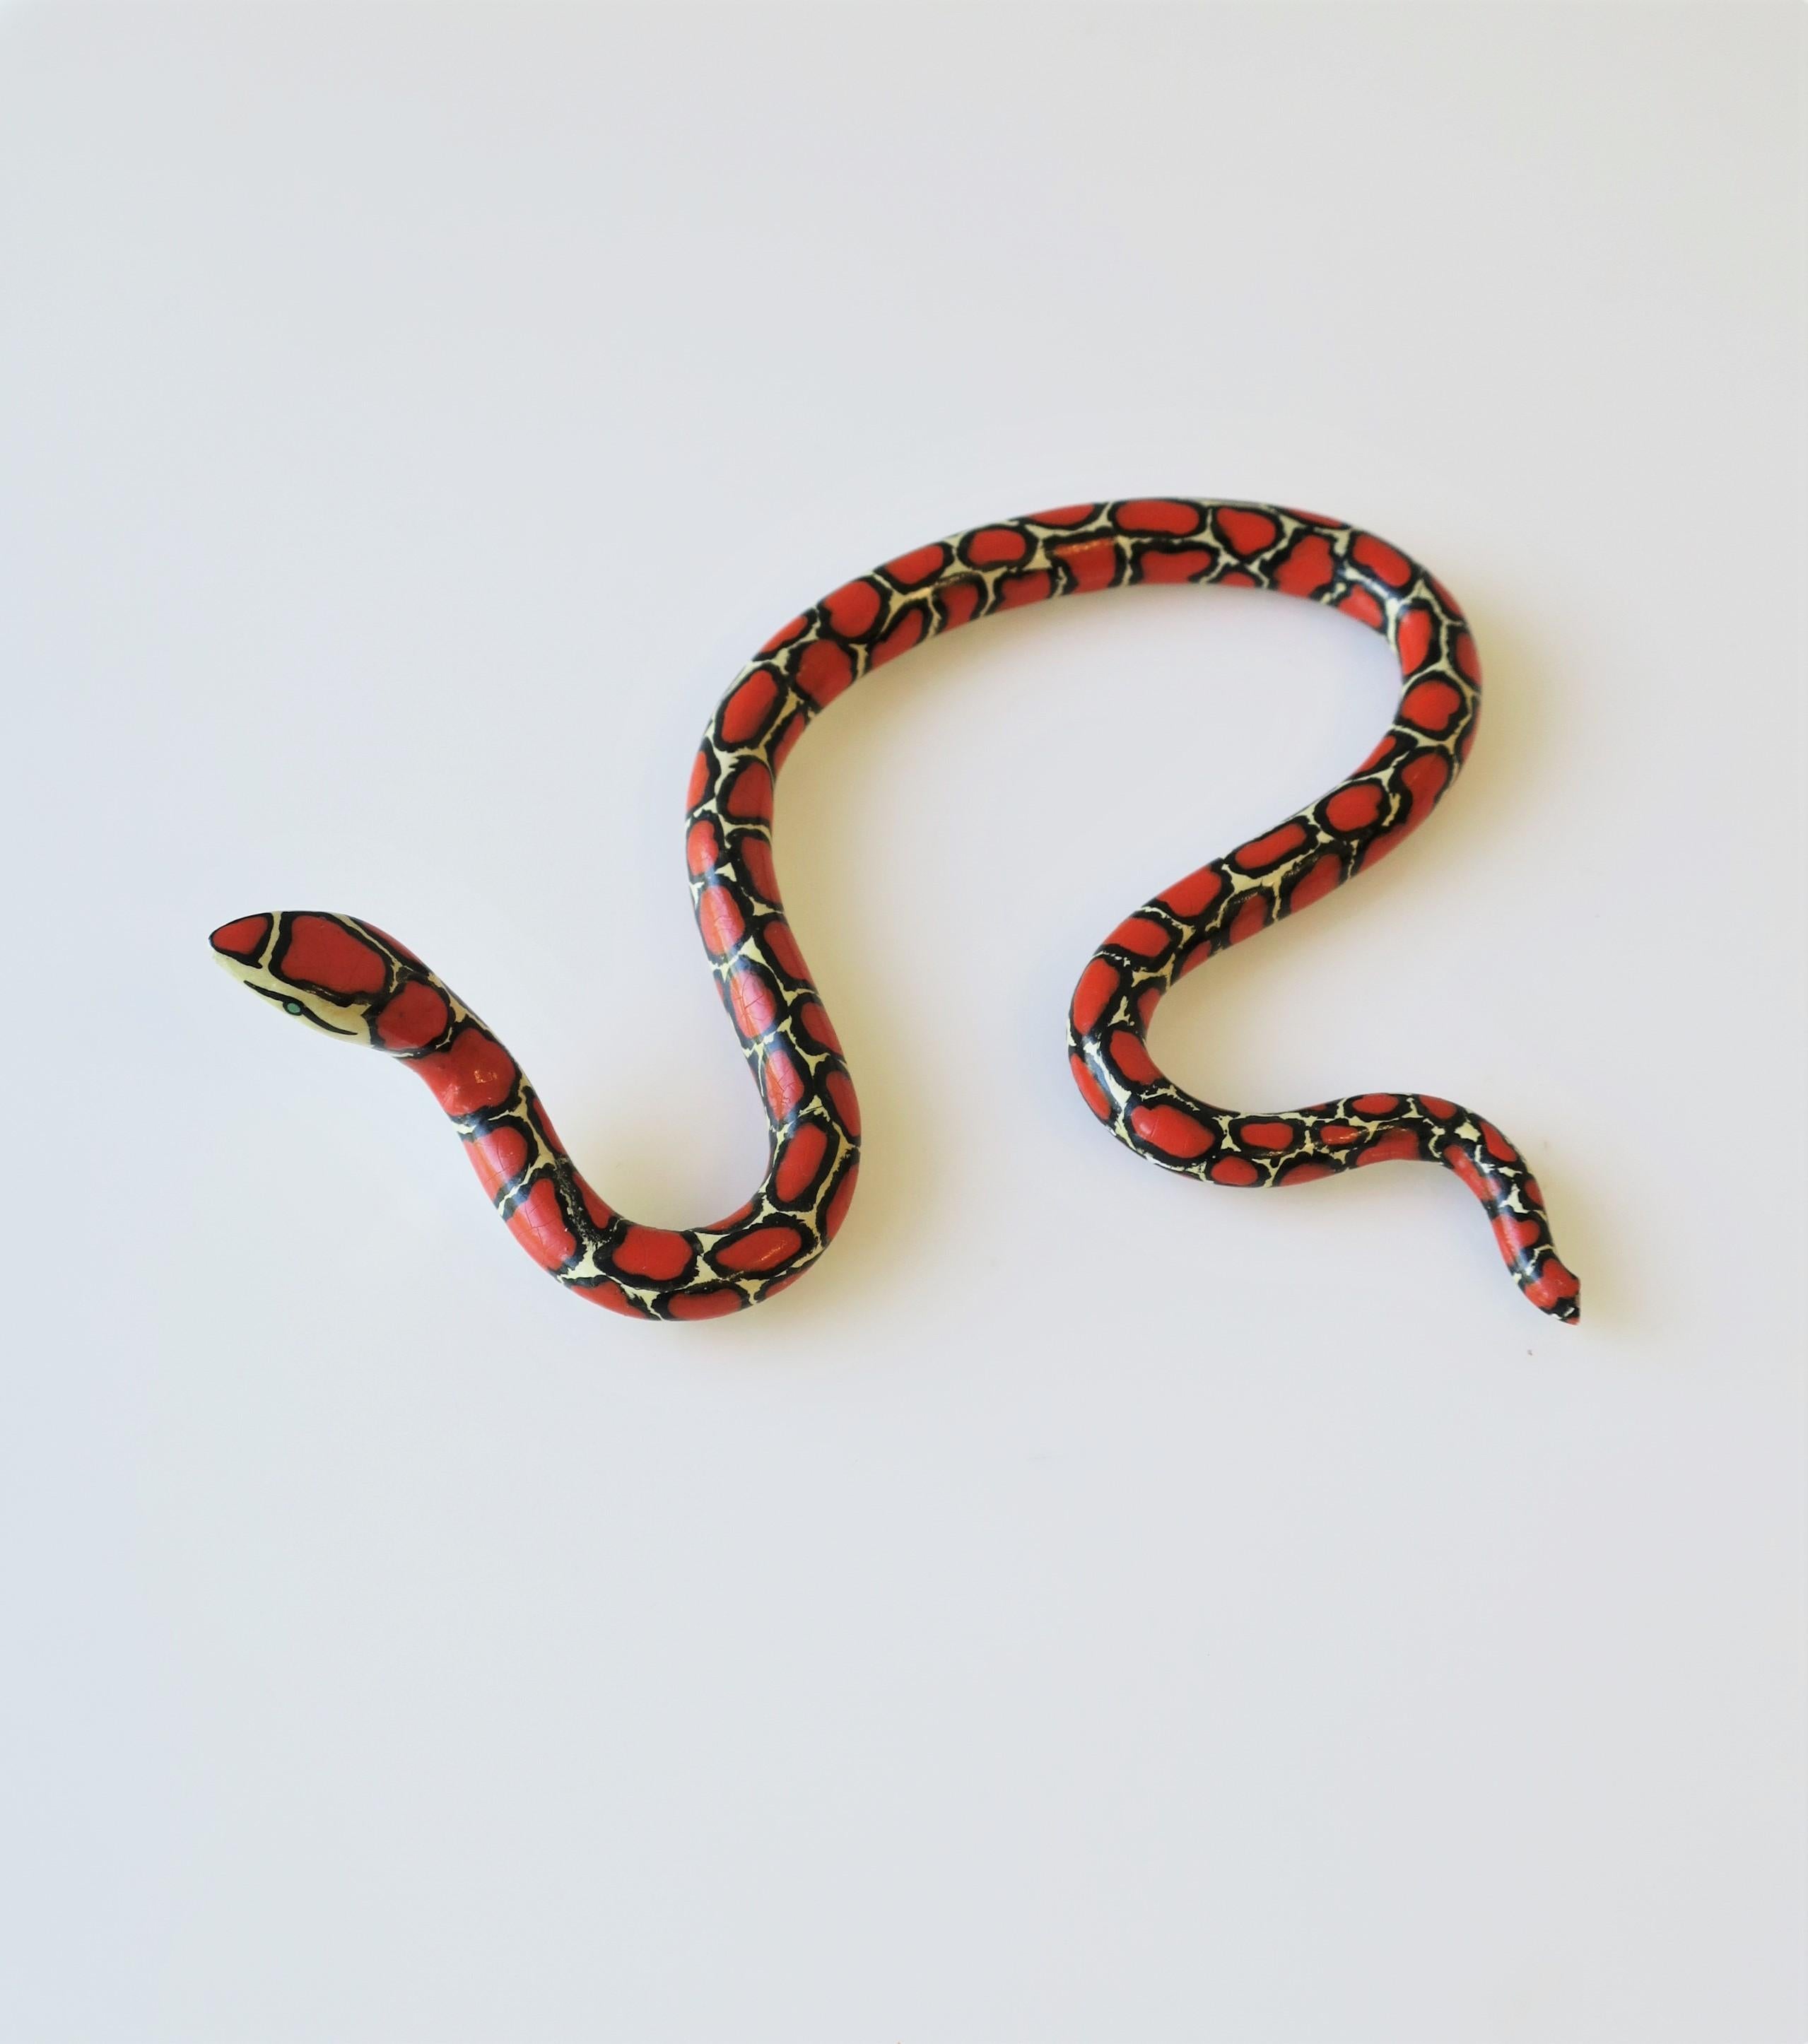 Hand-Painted Red Black and White Terracotta Ceramic Snake